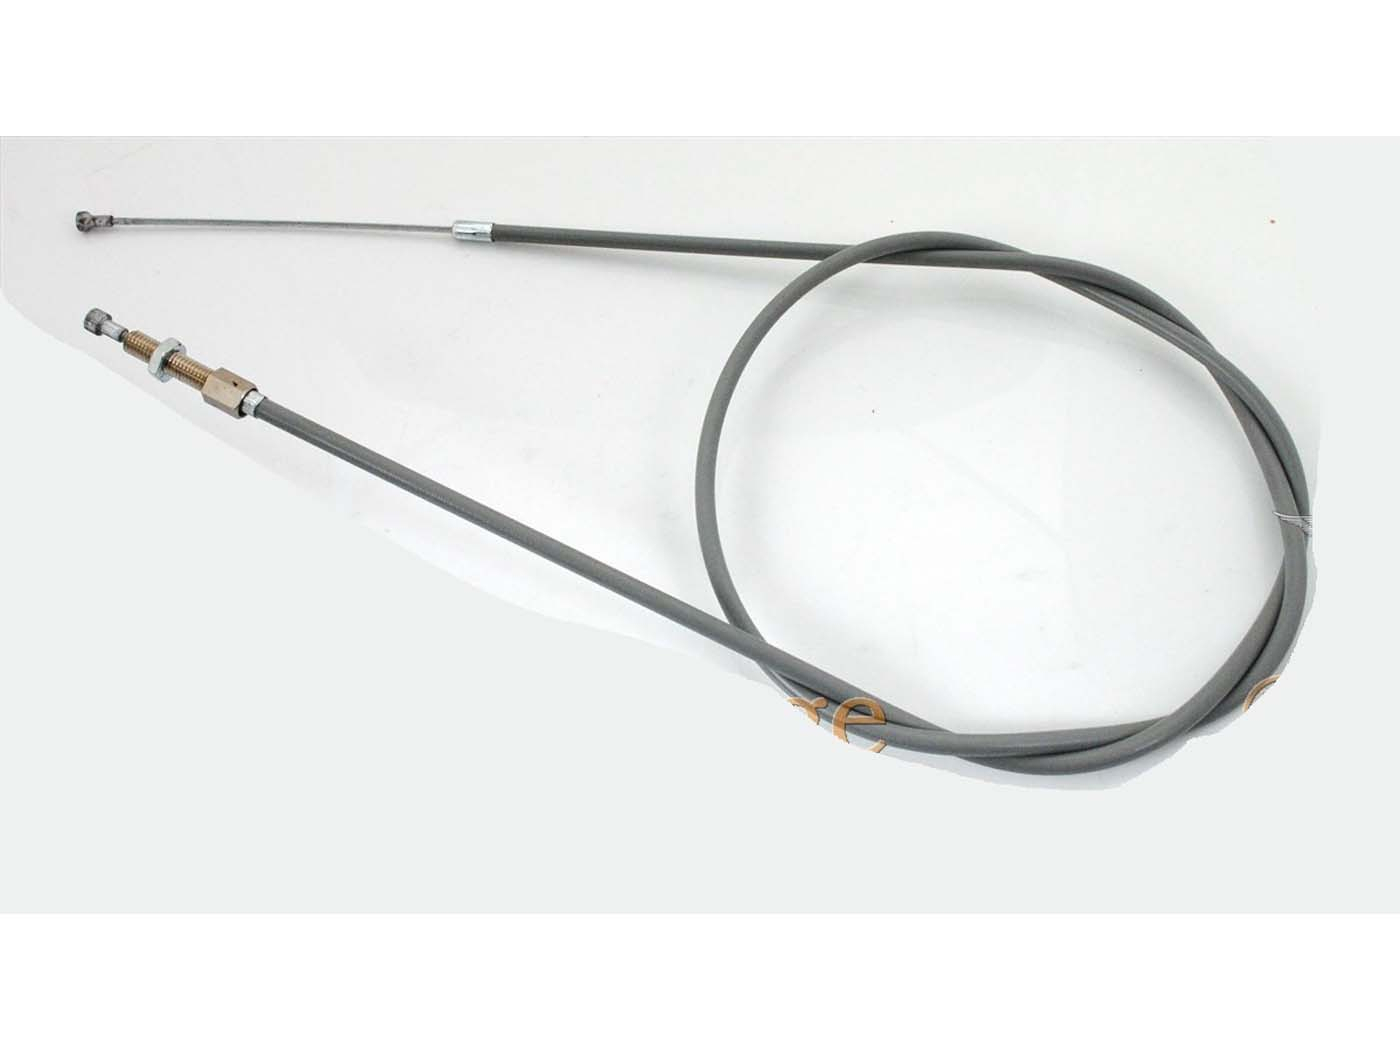 Victoria Handbrake Cable For Vicky 3 N